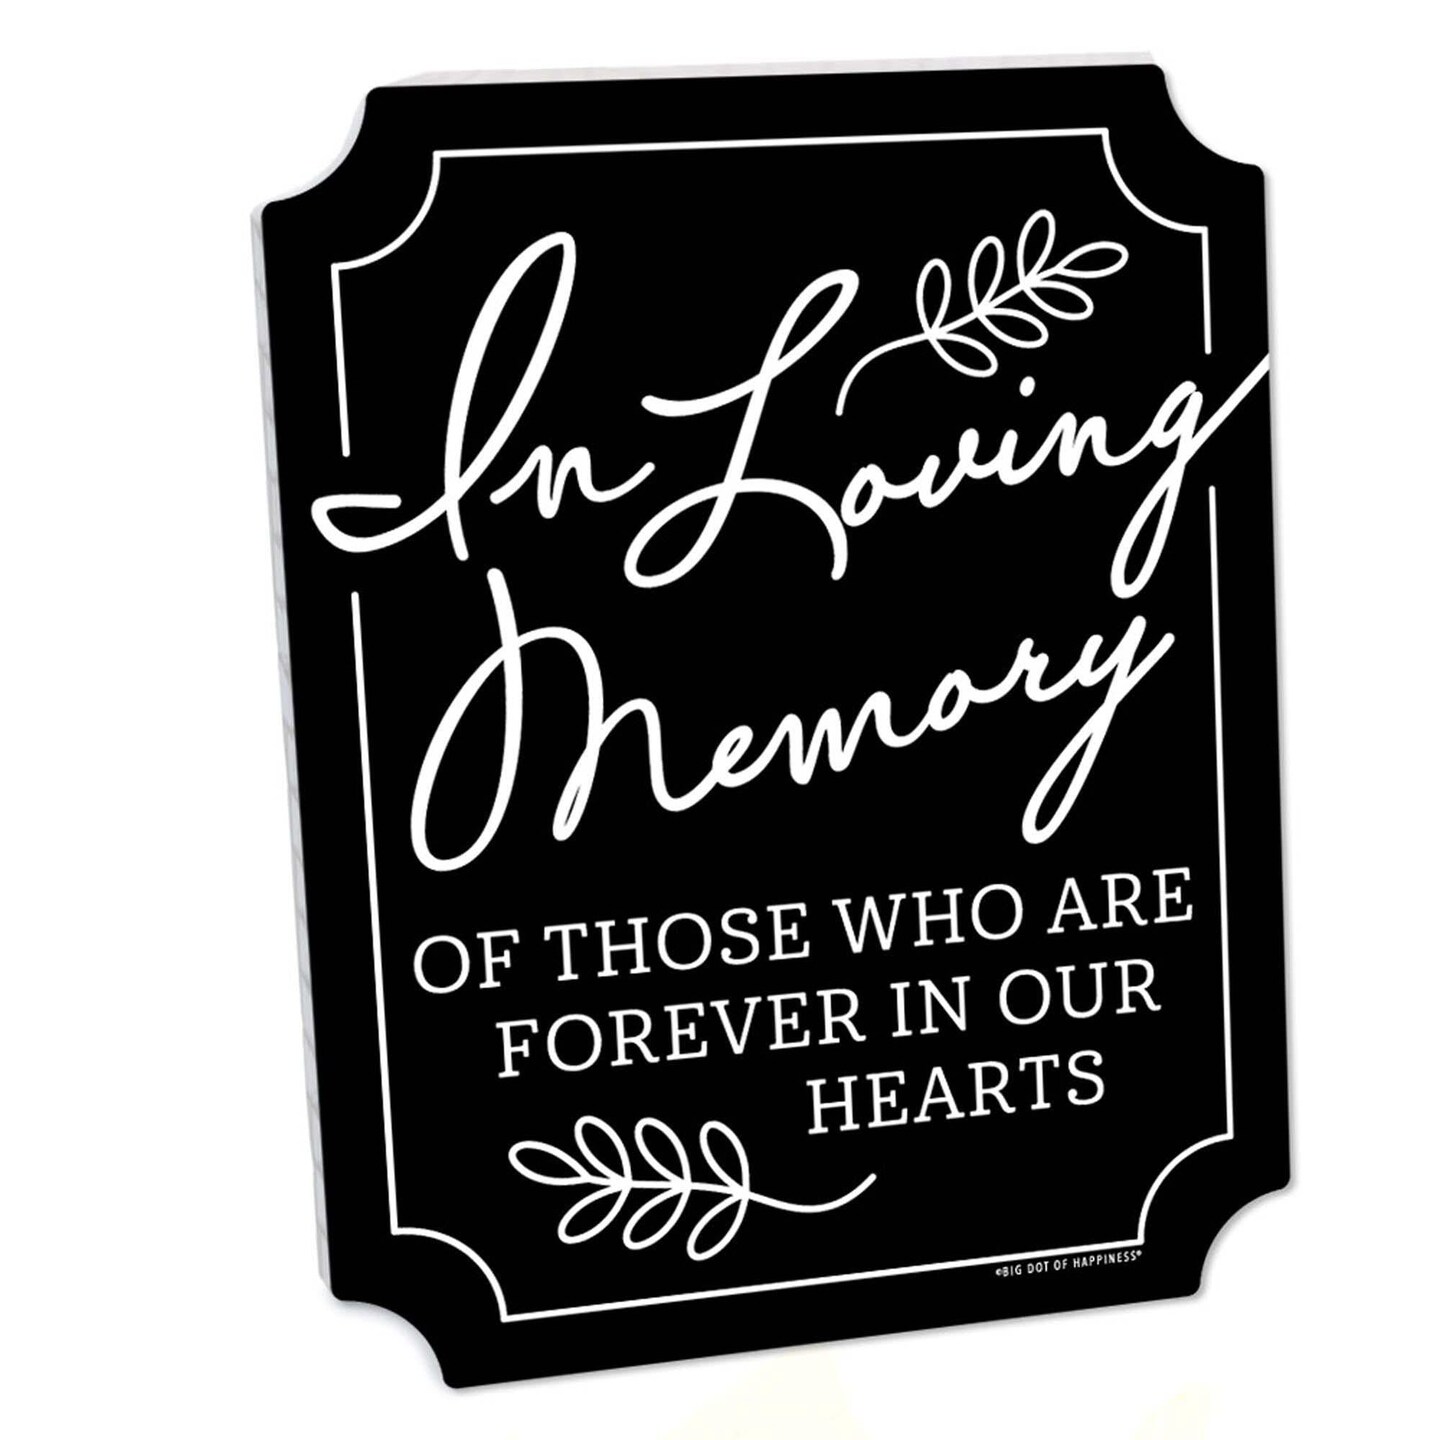 Big Dot of Happiness Black in Loving Memory Sign - Memorial Wedding Decor - Printed on Sturdy Plastic - 10.5 x 13.75 inches Sign with Stand - 1 Piece